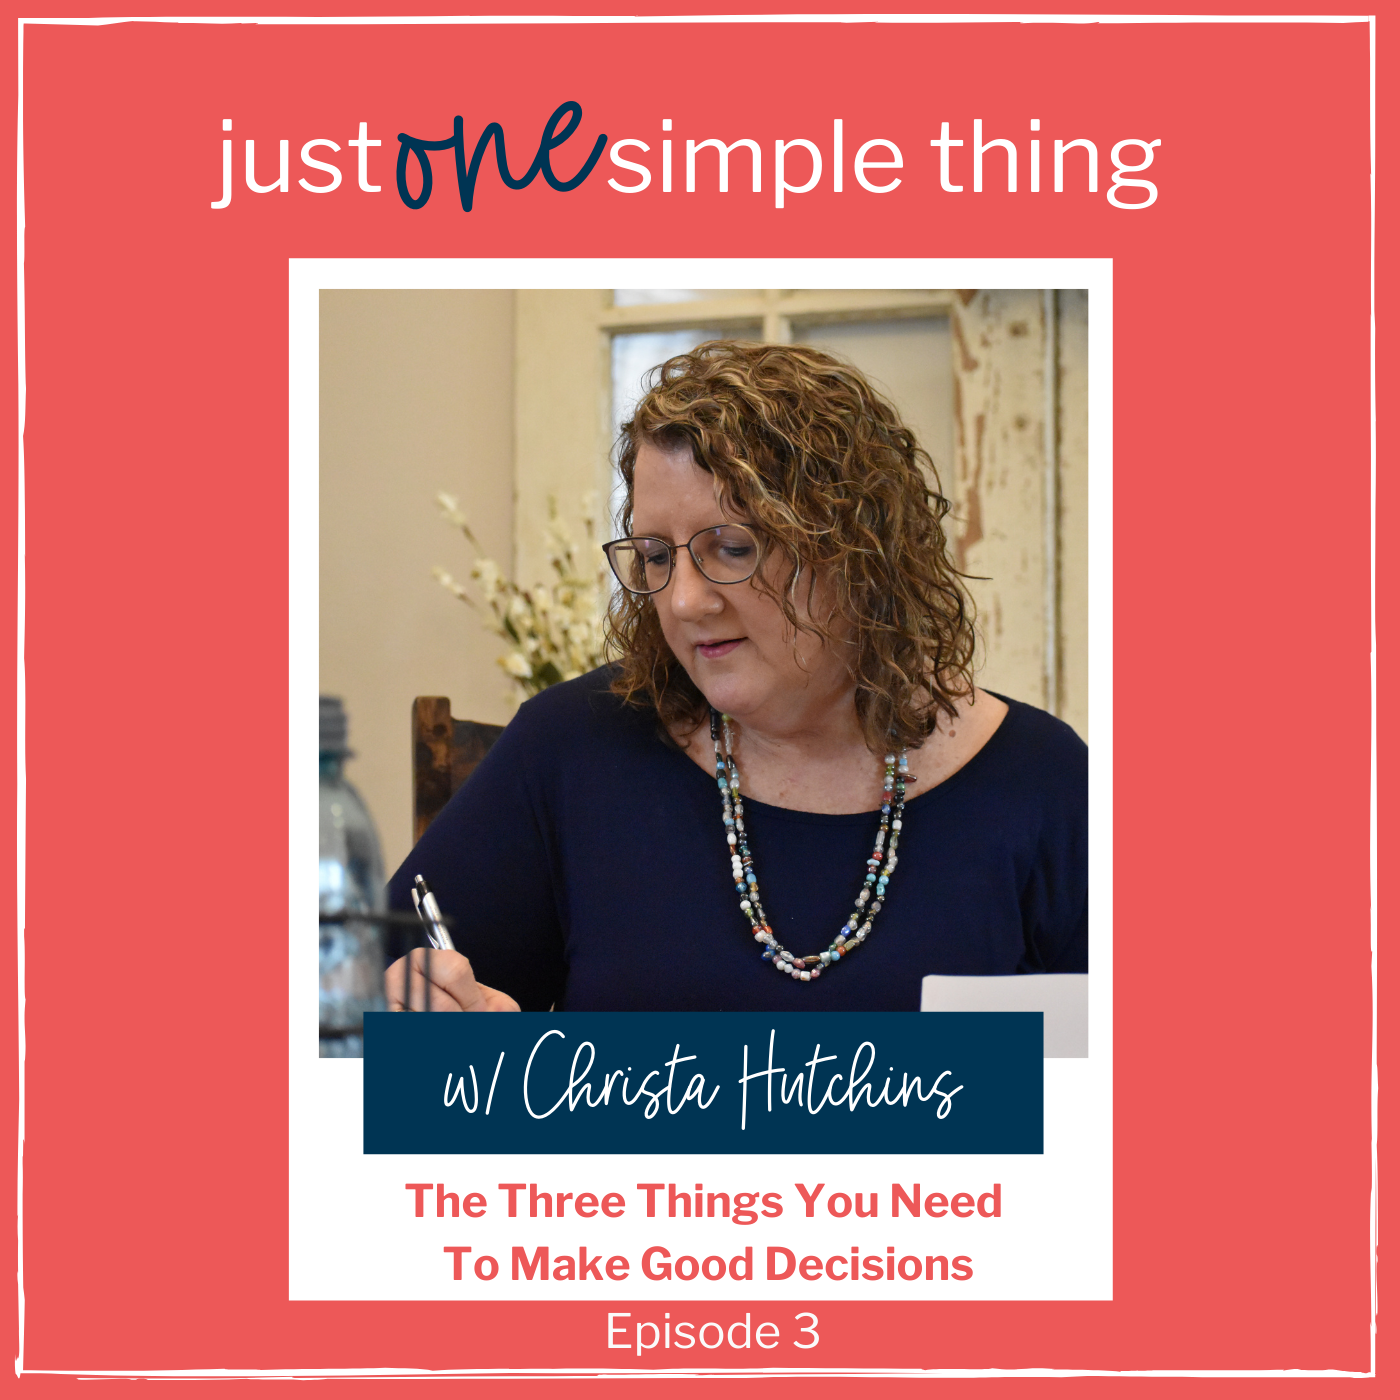 The Three Things You Need to Make Good Decisions